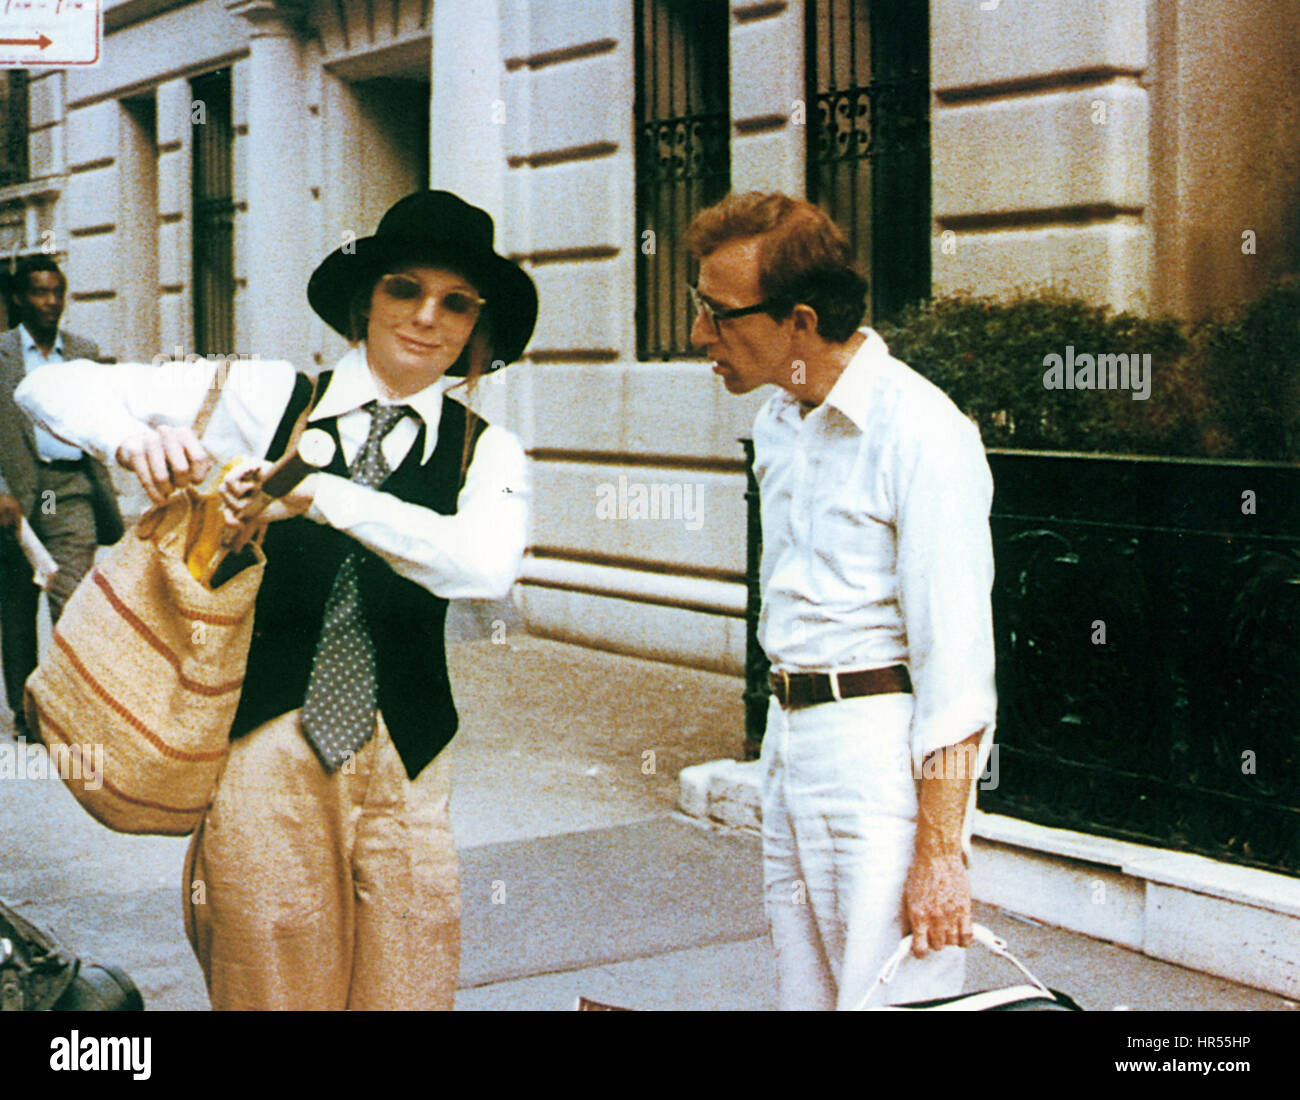 ANNIE HALL 1977 Rollins-Jofre Productions film with Diane Keaton and Woody Allen Stock Photo